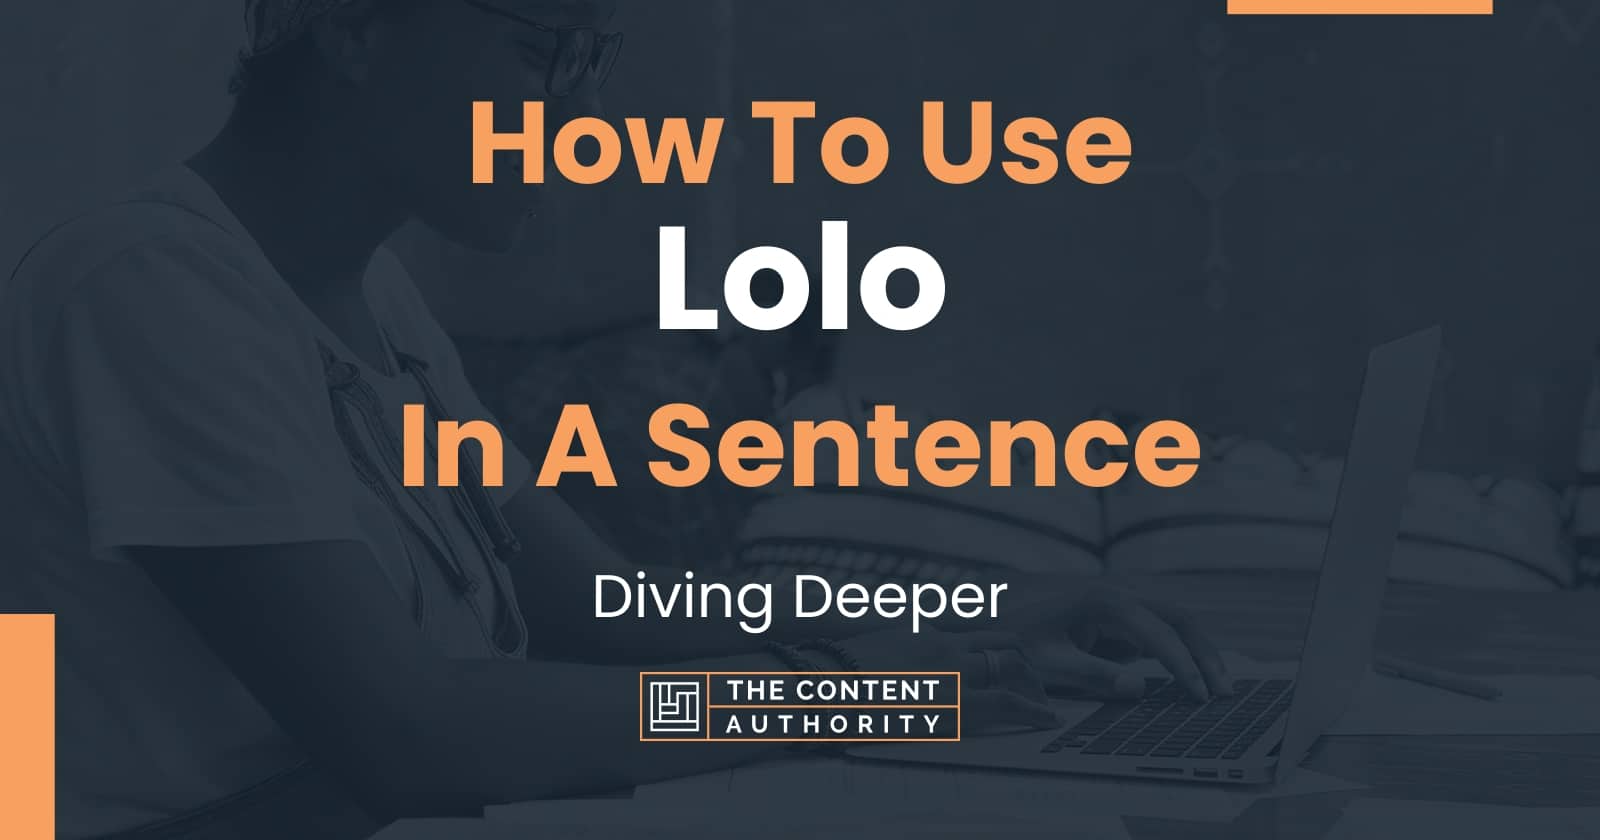 Lolo - Definition, Meaning & Synonyms